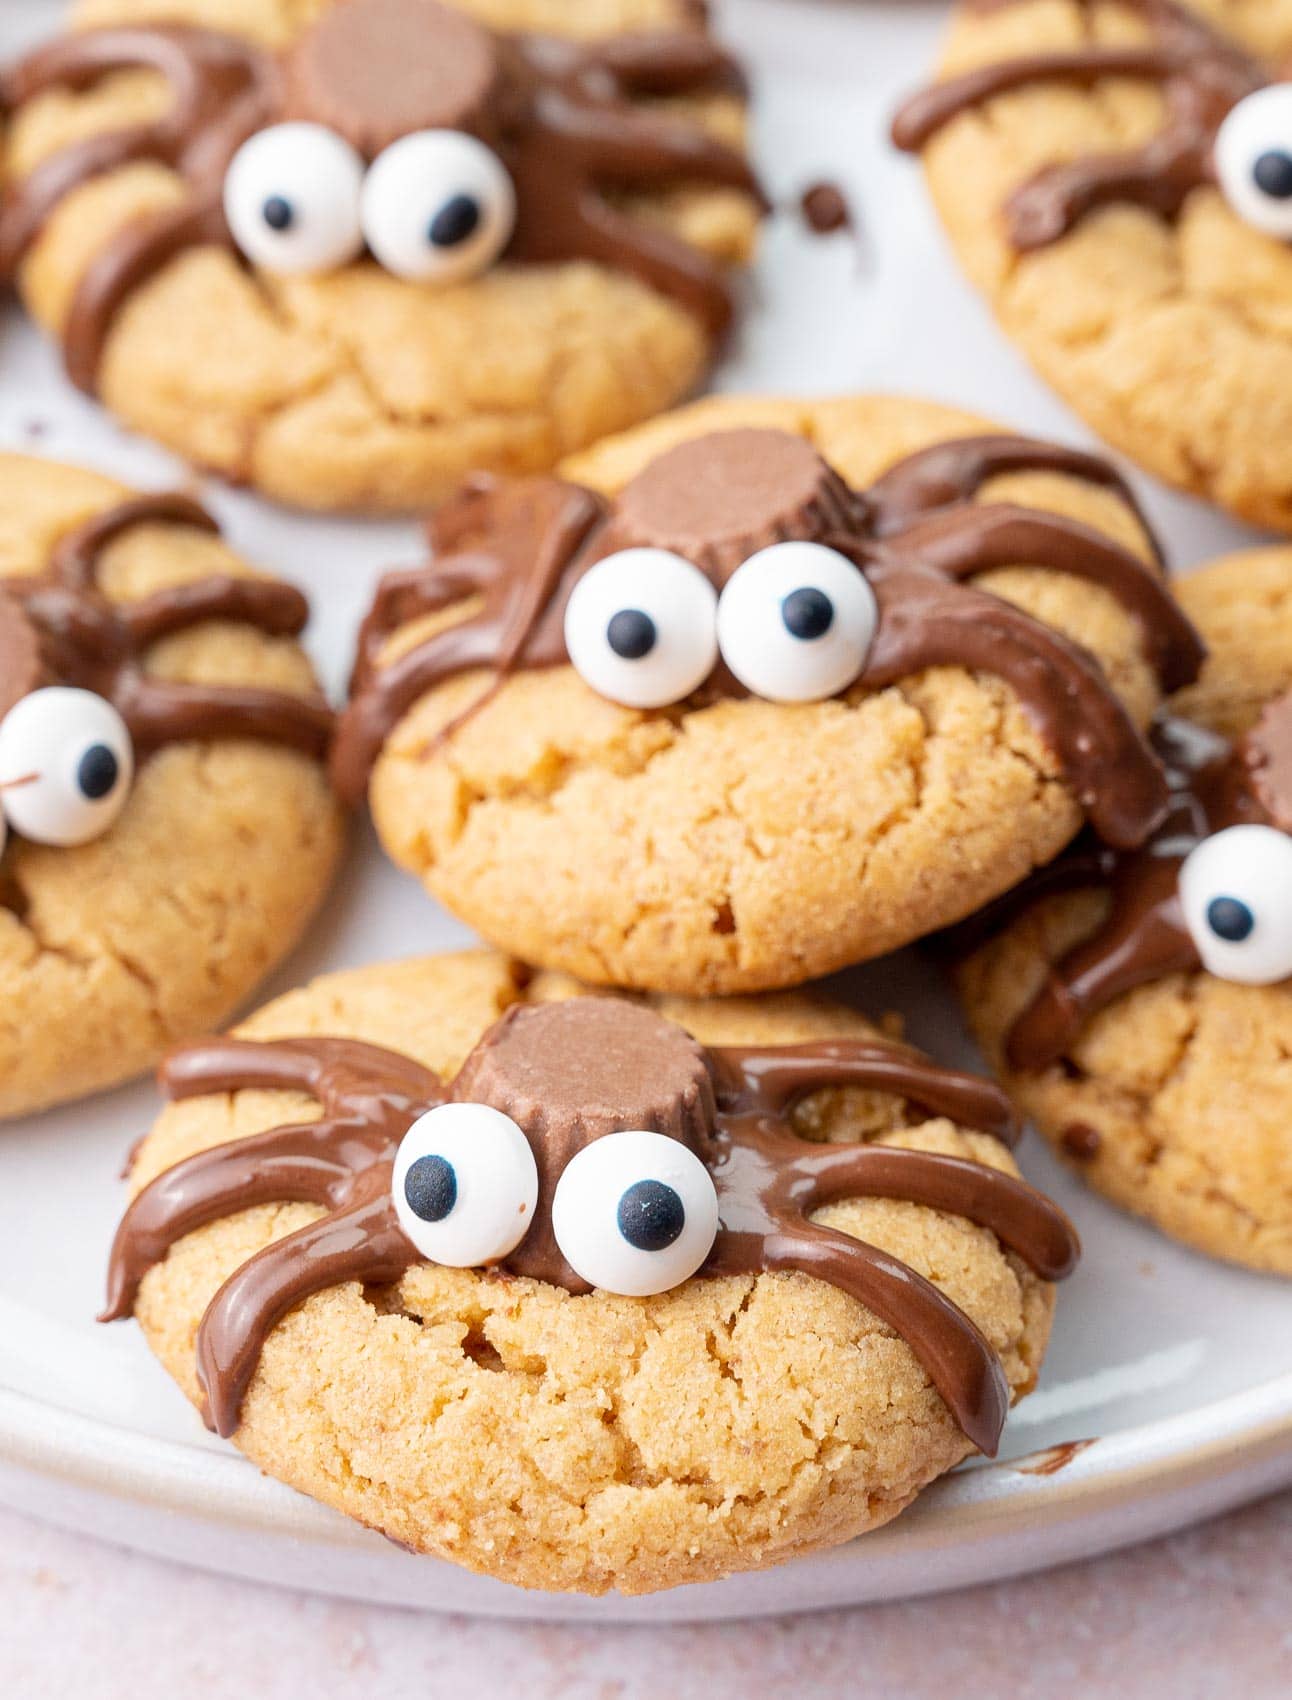 A close up photo of spider cookies on a white plate.